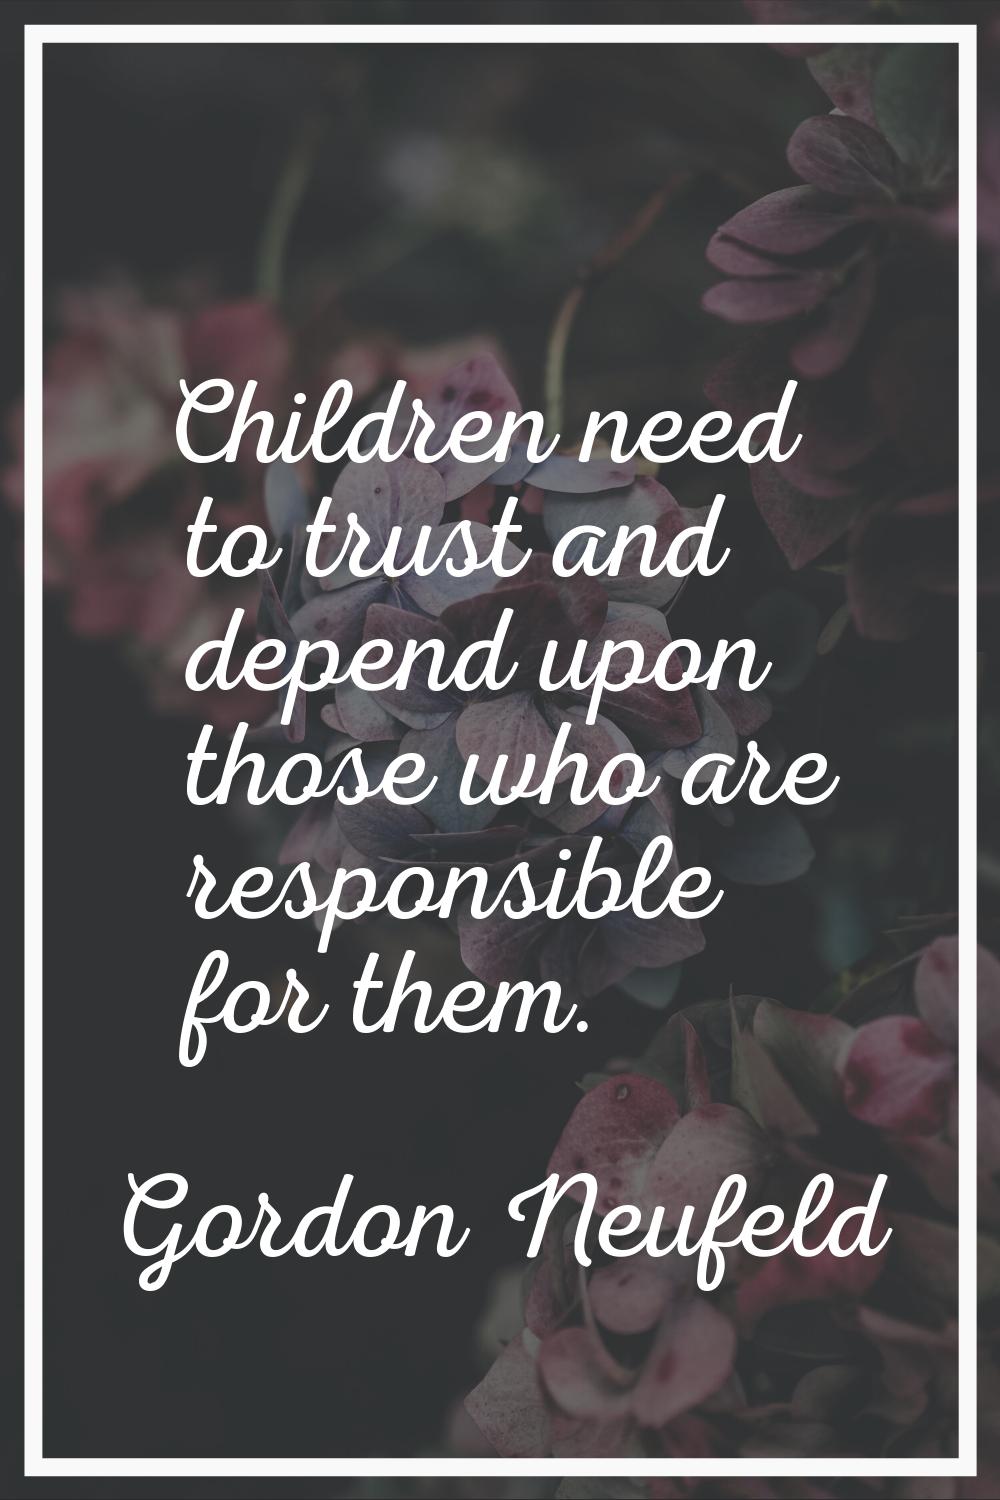 Children need to trust and depend upon those who are responsible for them.